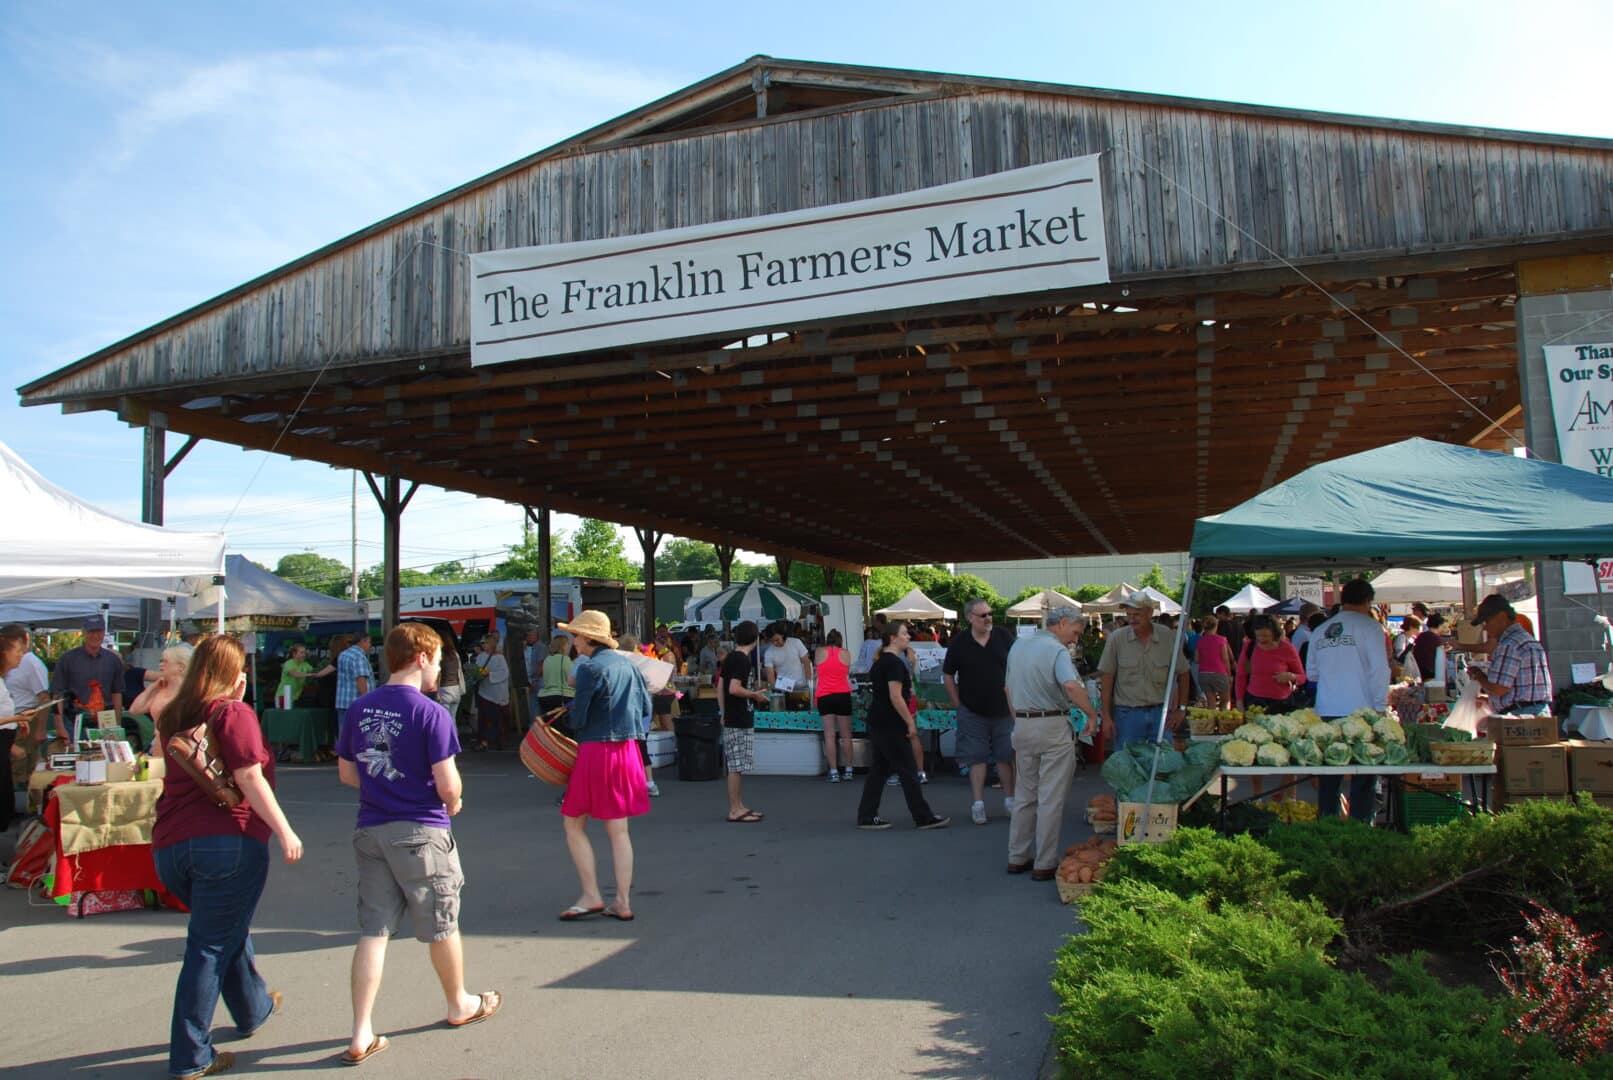 Things to do in Downtown Franklin, TN, the Franklin Farmers Market offers shopping for fresh produce, crafts, baked goods, dairy items, meats and much more!